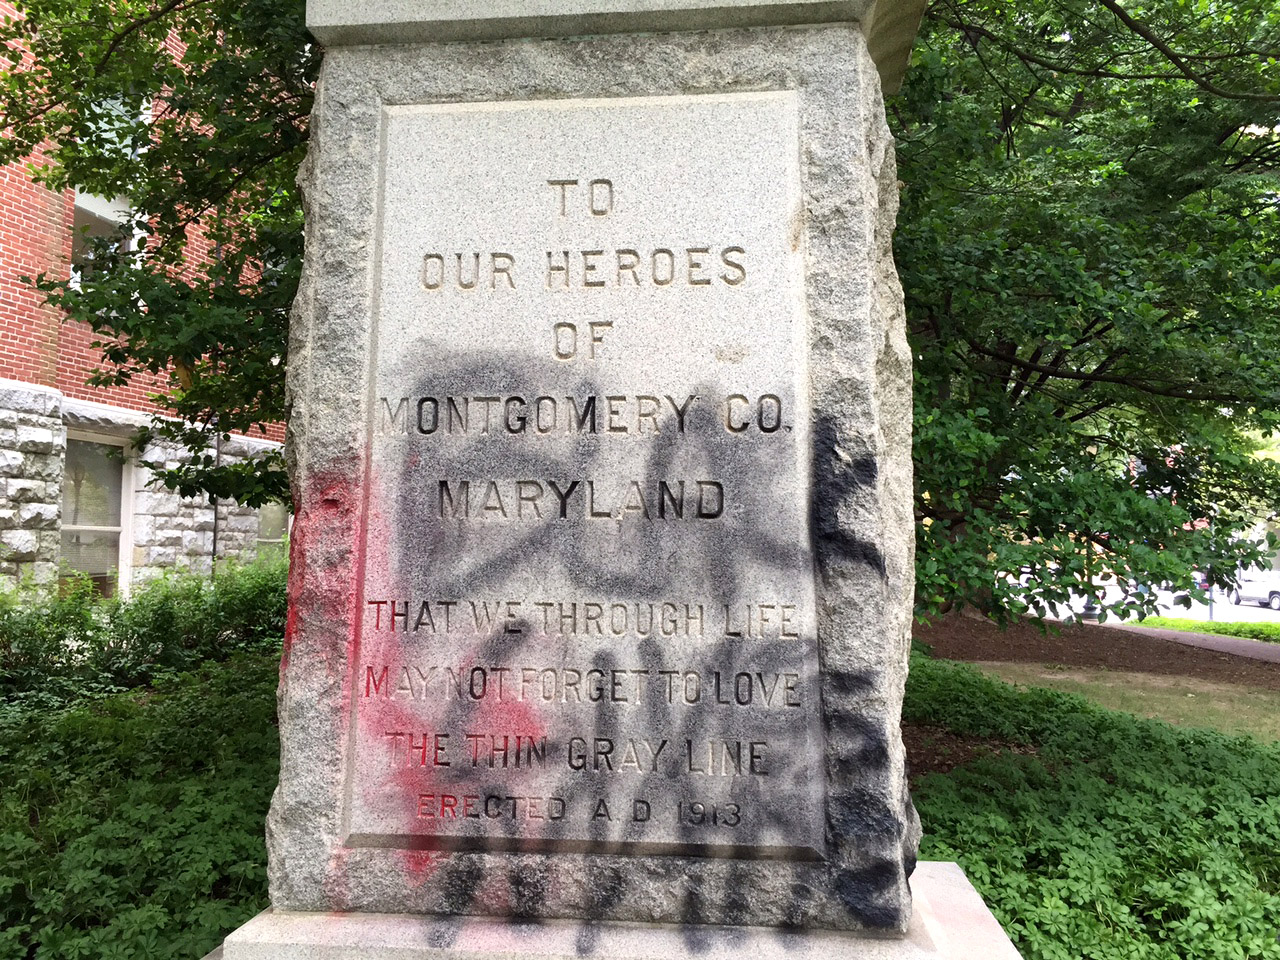 The words "Black Lives Matter" are scrawled across the pedestal of a Confederate statue in Rockville. The vandalism was discovered Monday morning to the sculpture that was already targeted for removal from county property. (WTOP/Kate Ryan)